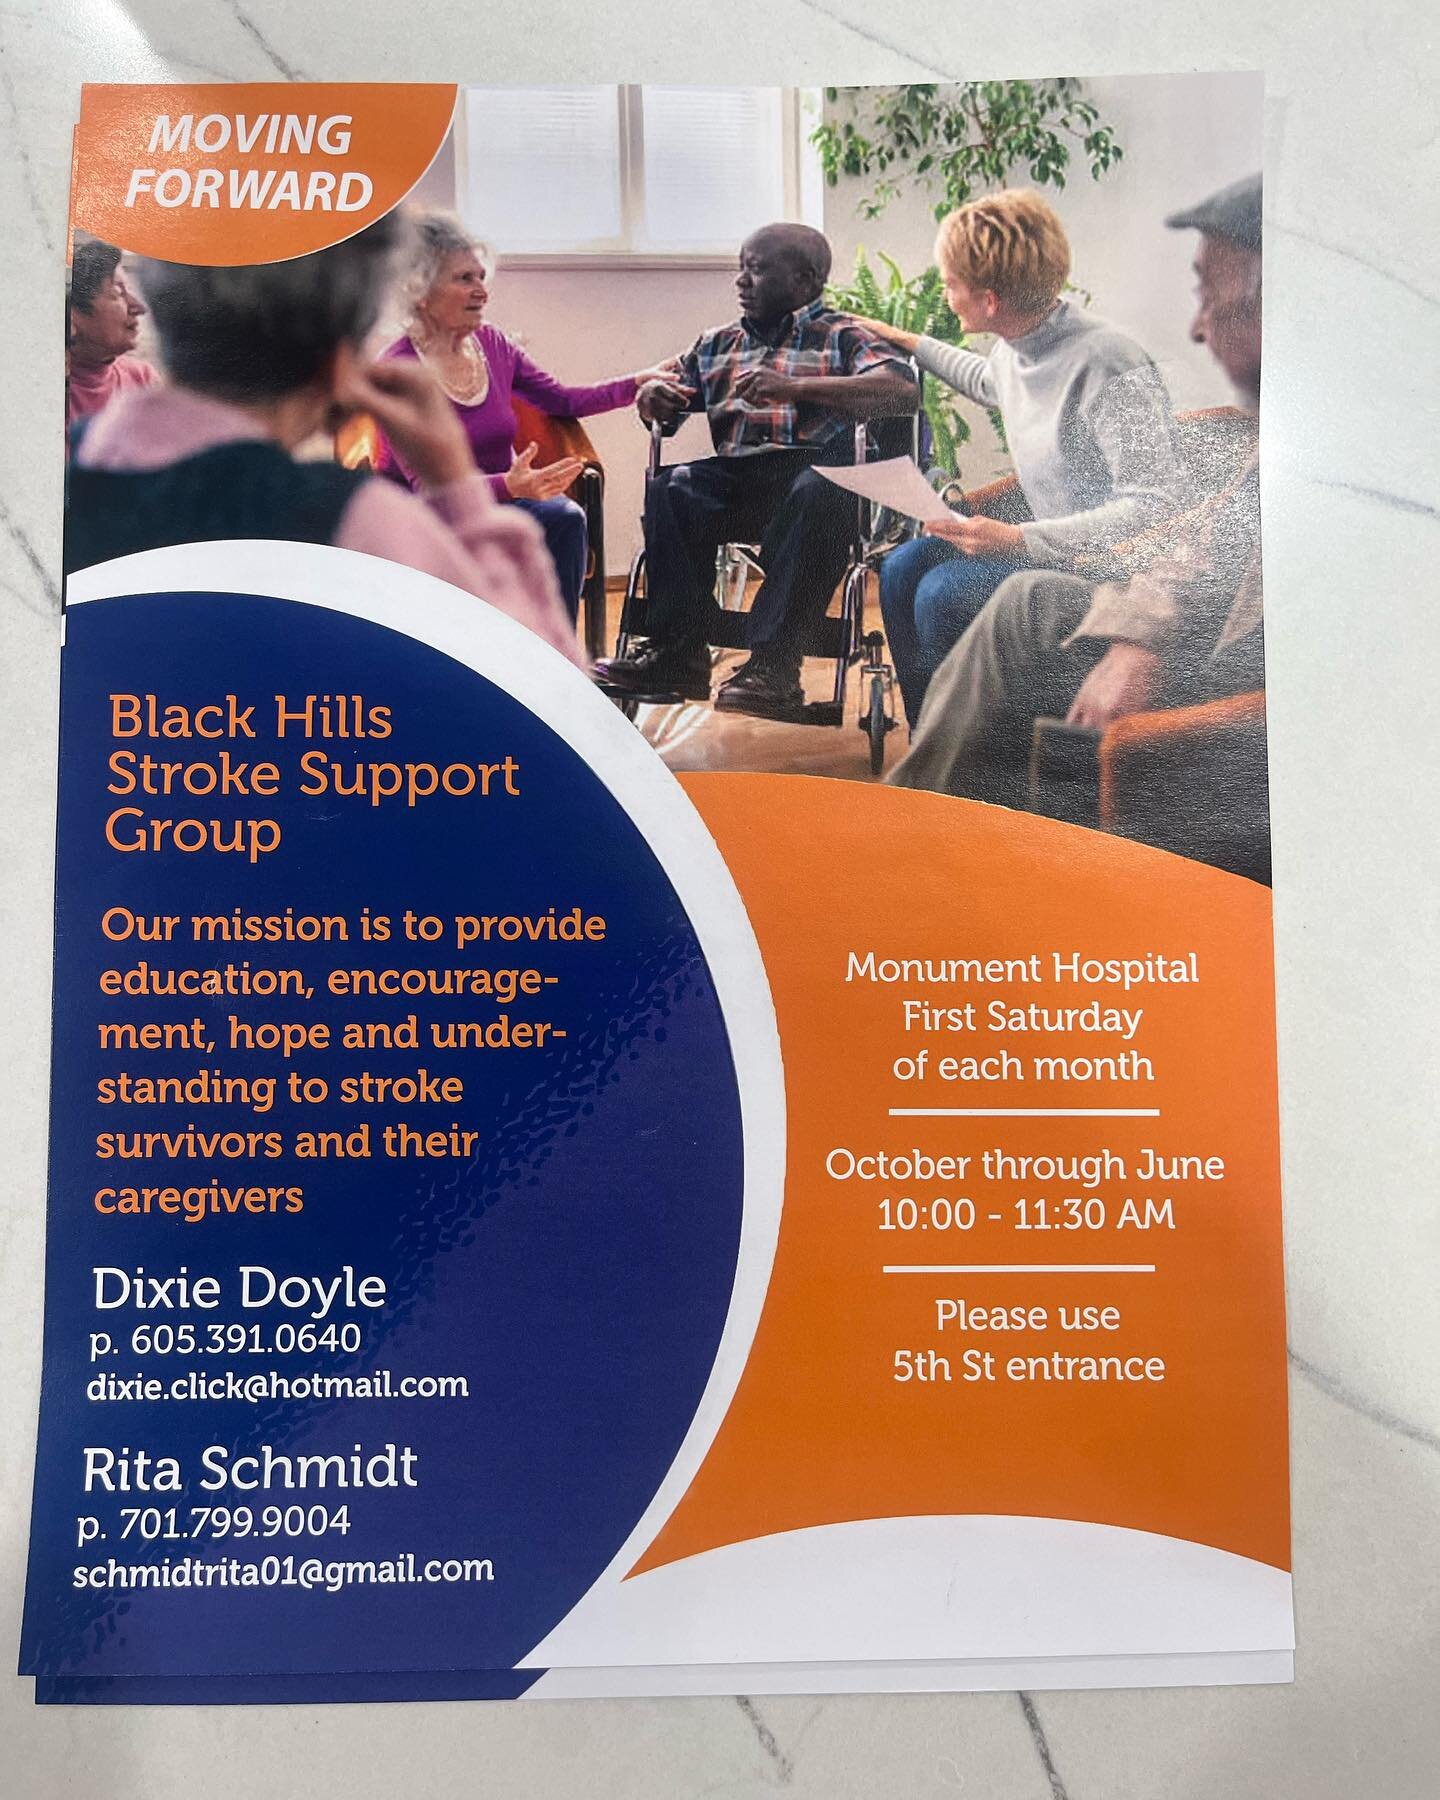 Black Hills Stroke Support Group dropped off some flyers with us! They are meeting this upcoming Saturday at Monument. Reach out to Rita or Dixie if you have any questions!